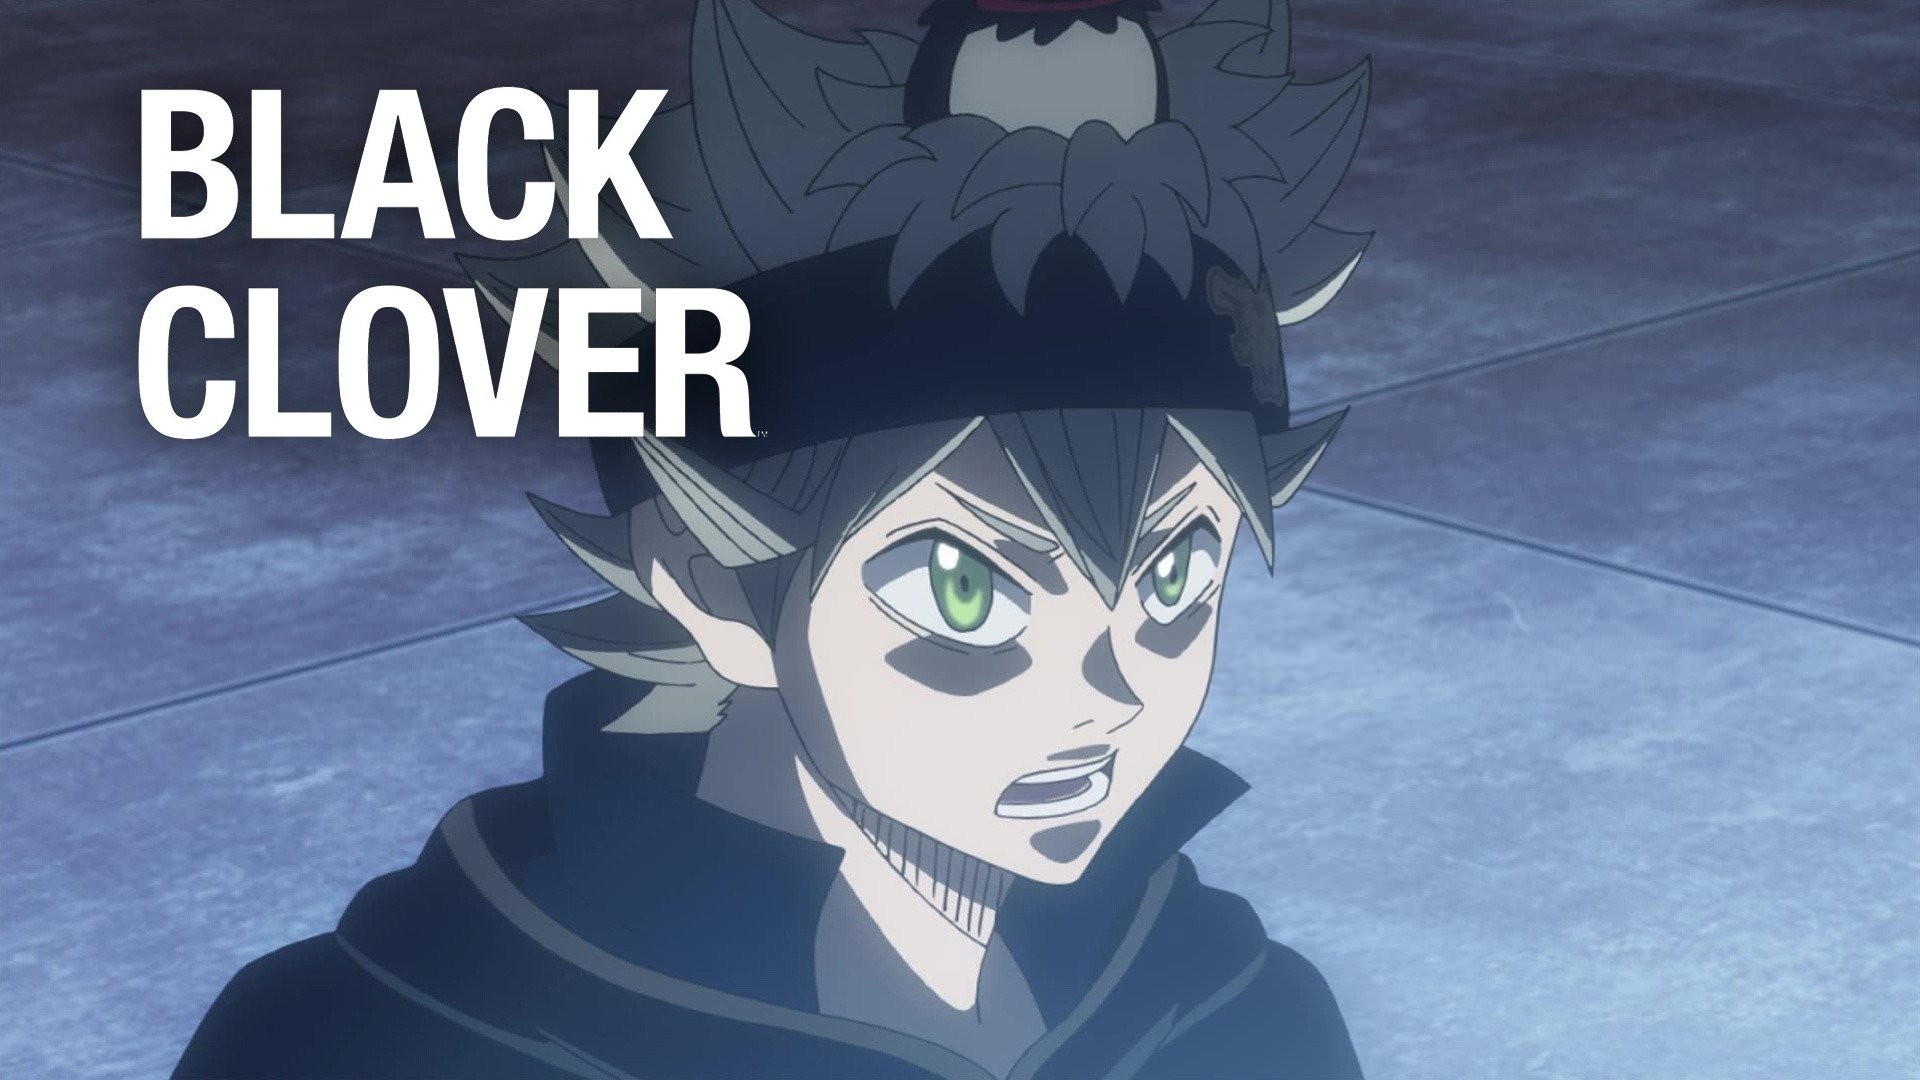 Asta Wallpaper 1920x1080 Best Asta Wallpaper 1920x1080 Wallpapers for All  Devices 